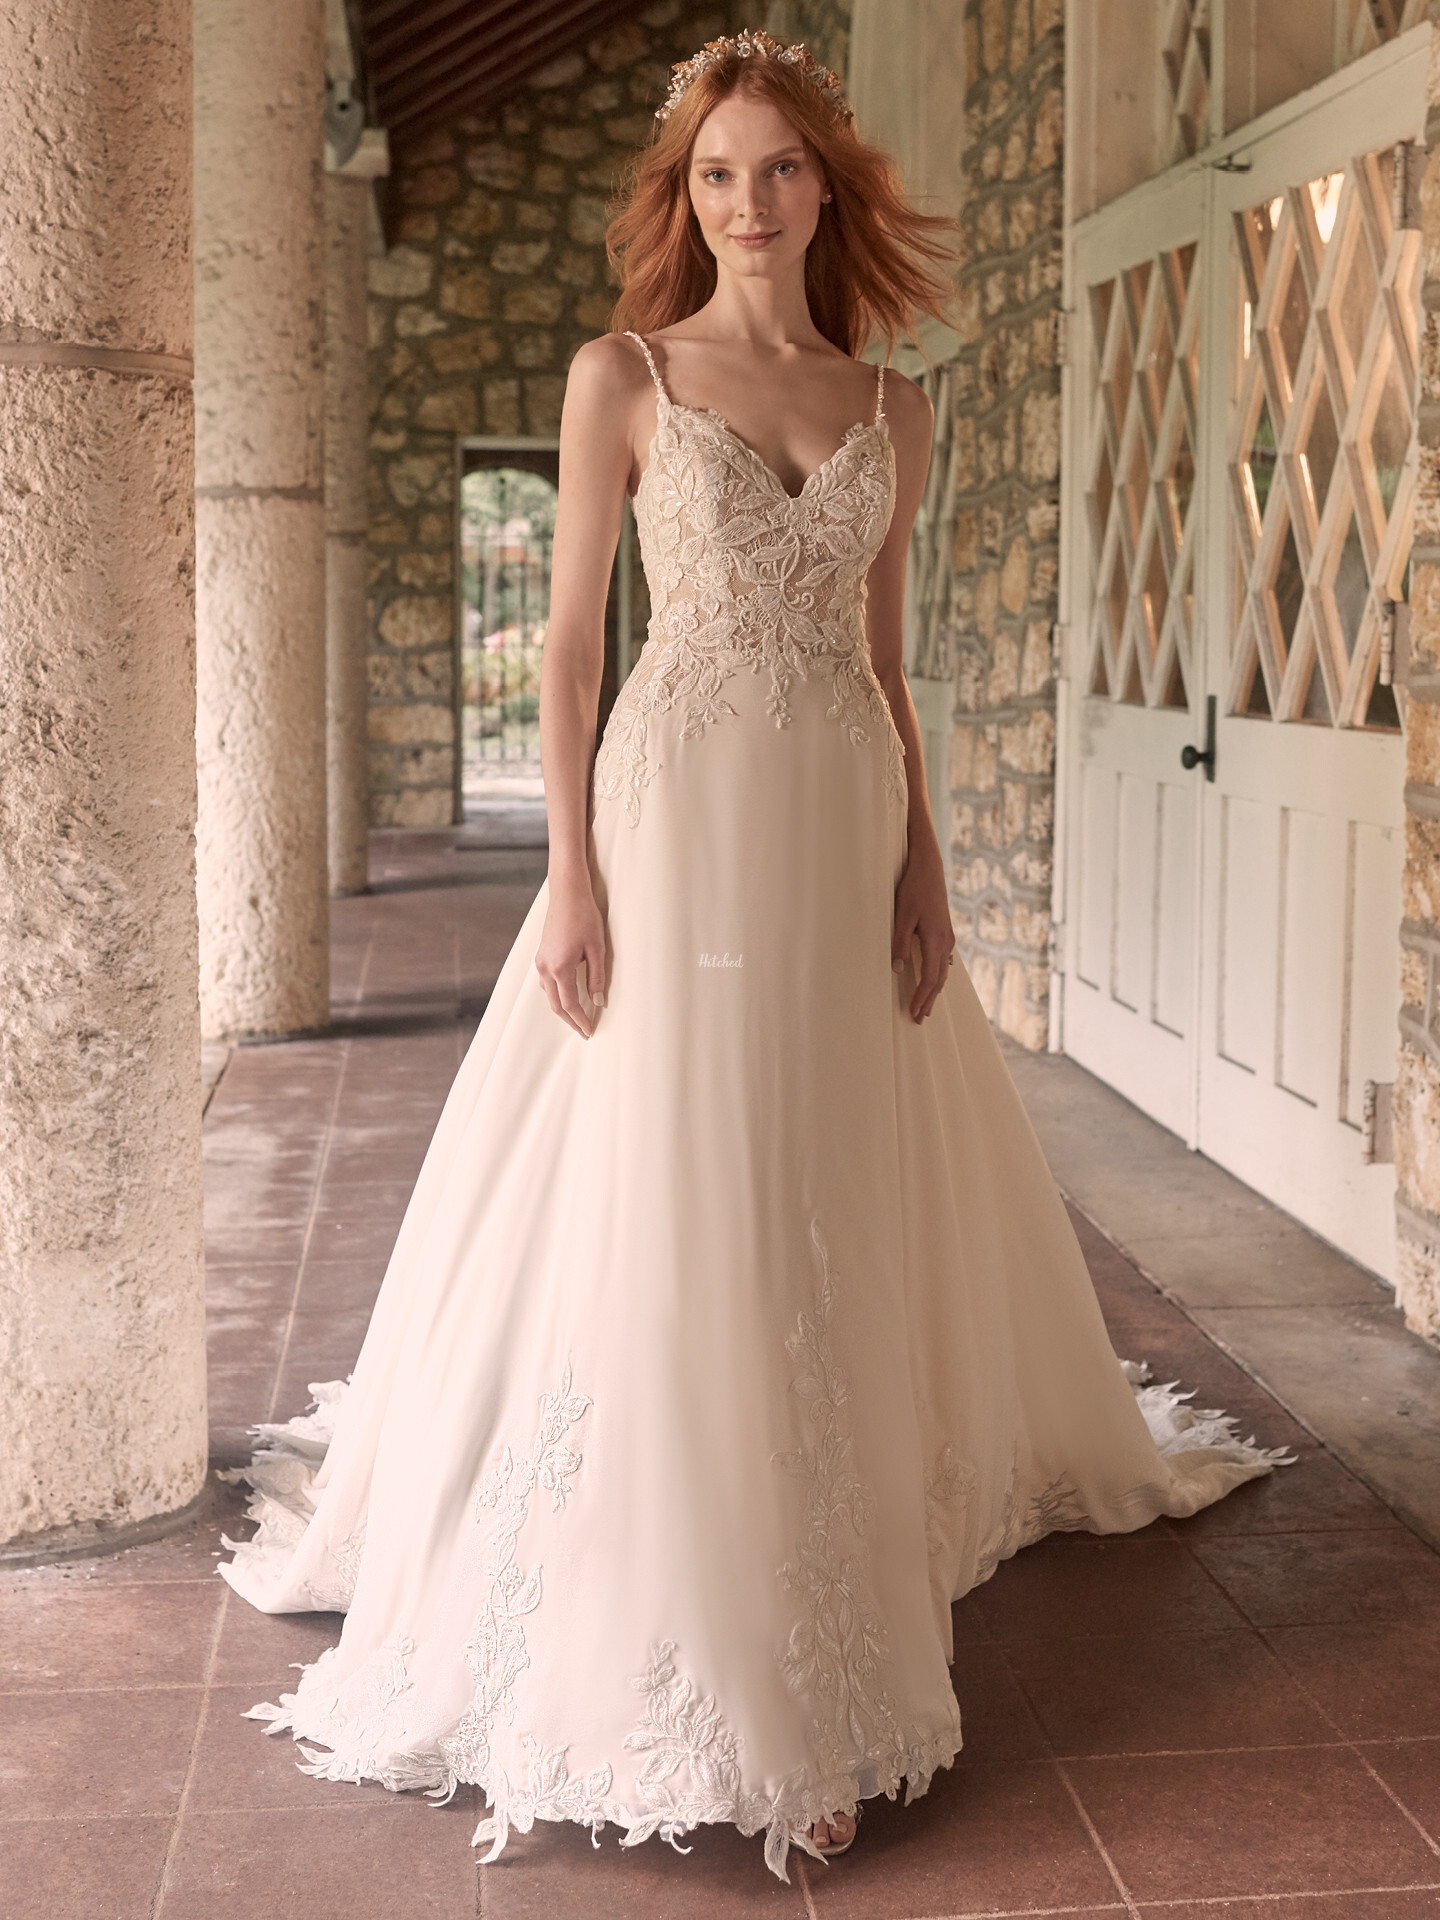 Best Maggie Sottero Wedding Dresses Prices  Check it out now 